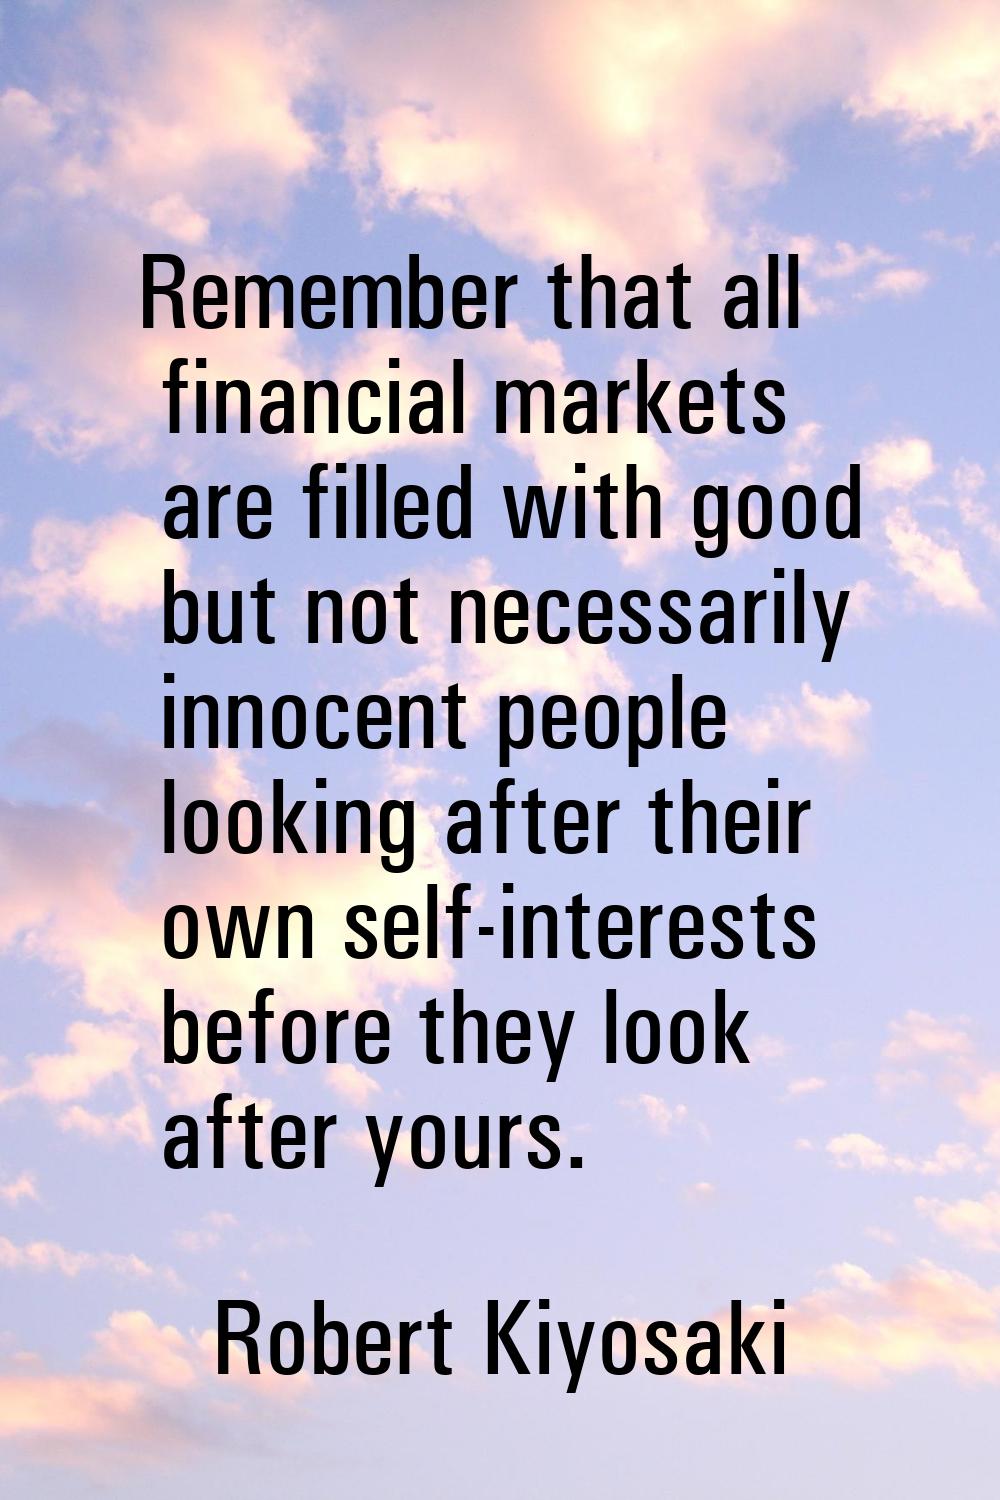 Remember that all financial markets are filled with good but not necessarily innocent people lookin